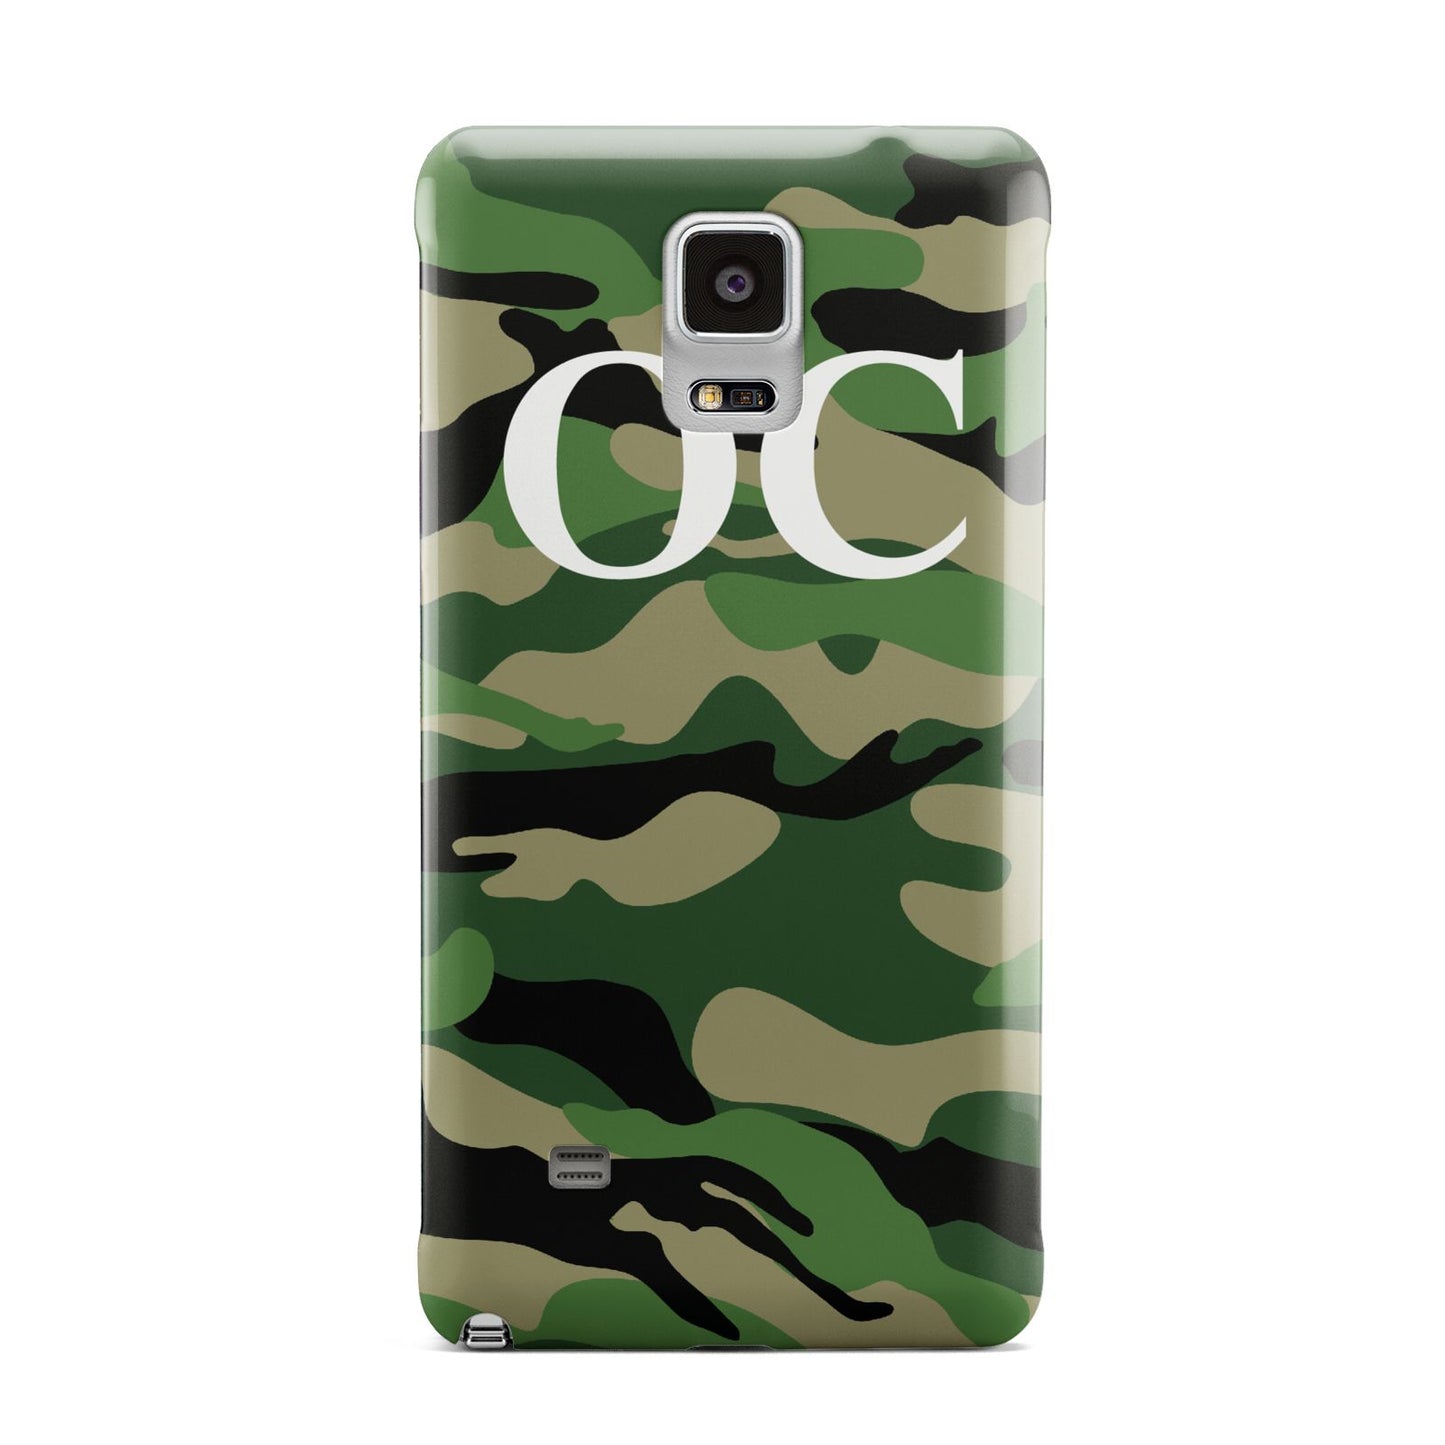 Personalised Camouflage Samsung Galaxy Note 4 Case